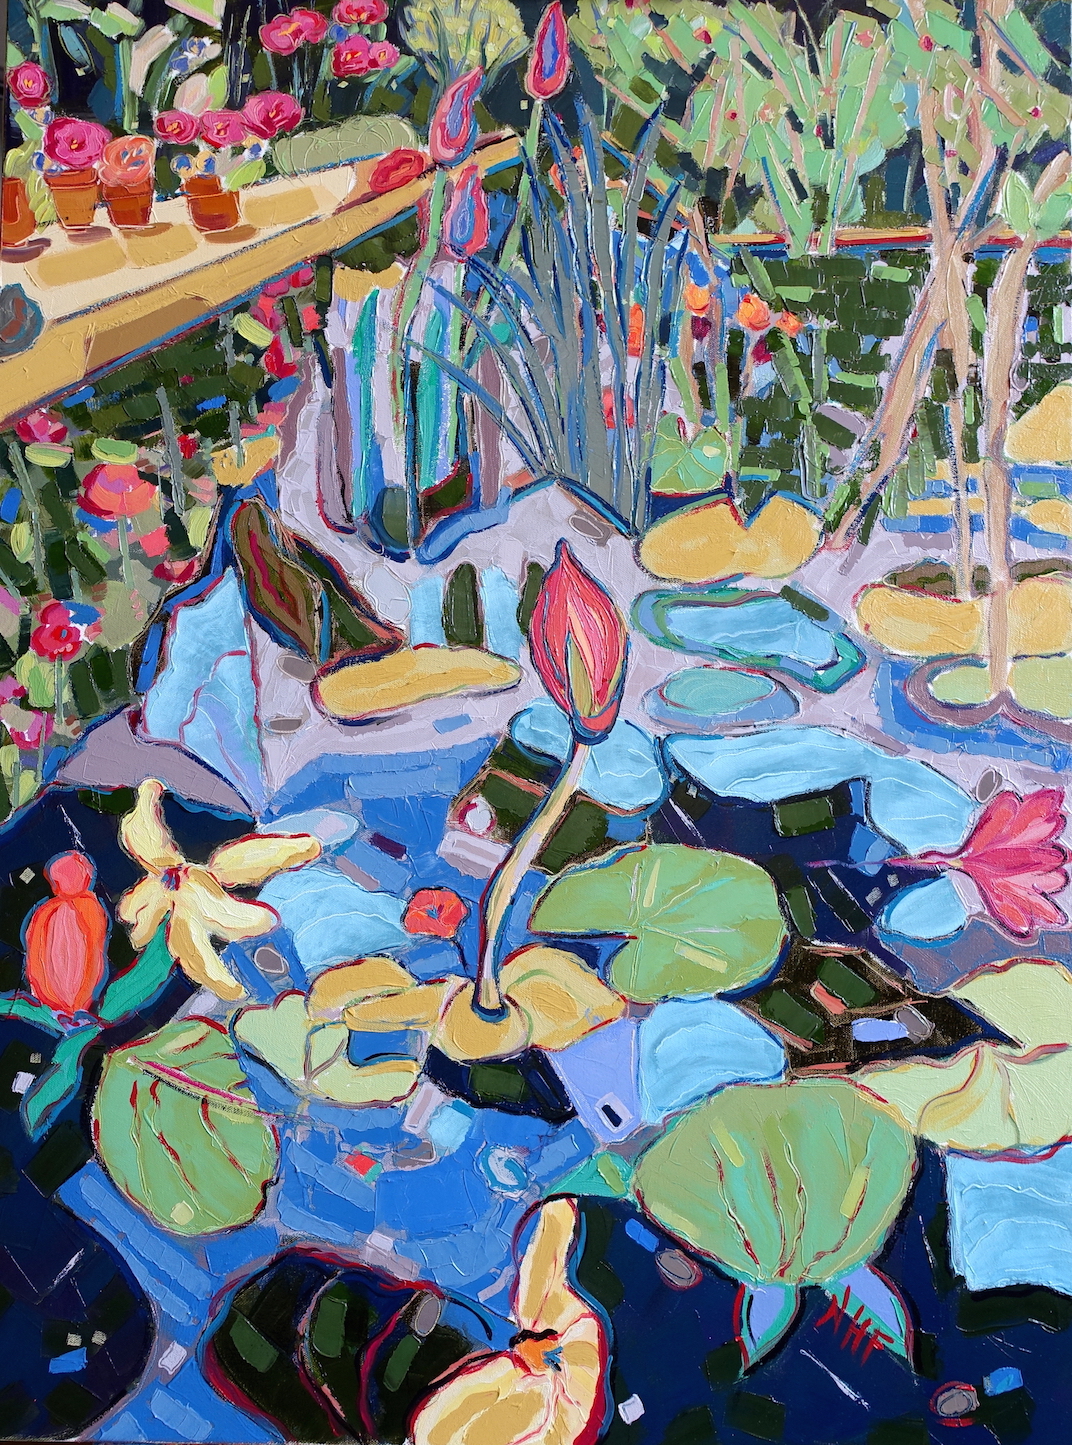   Into the Pond 4 , oil on canvas, 40x30 